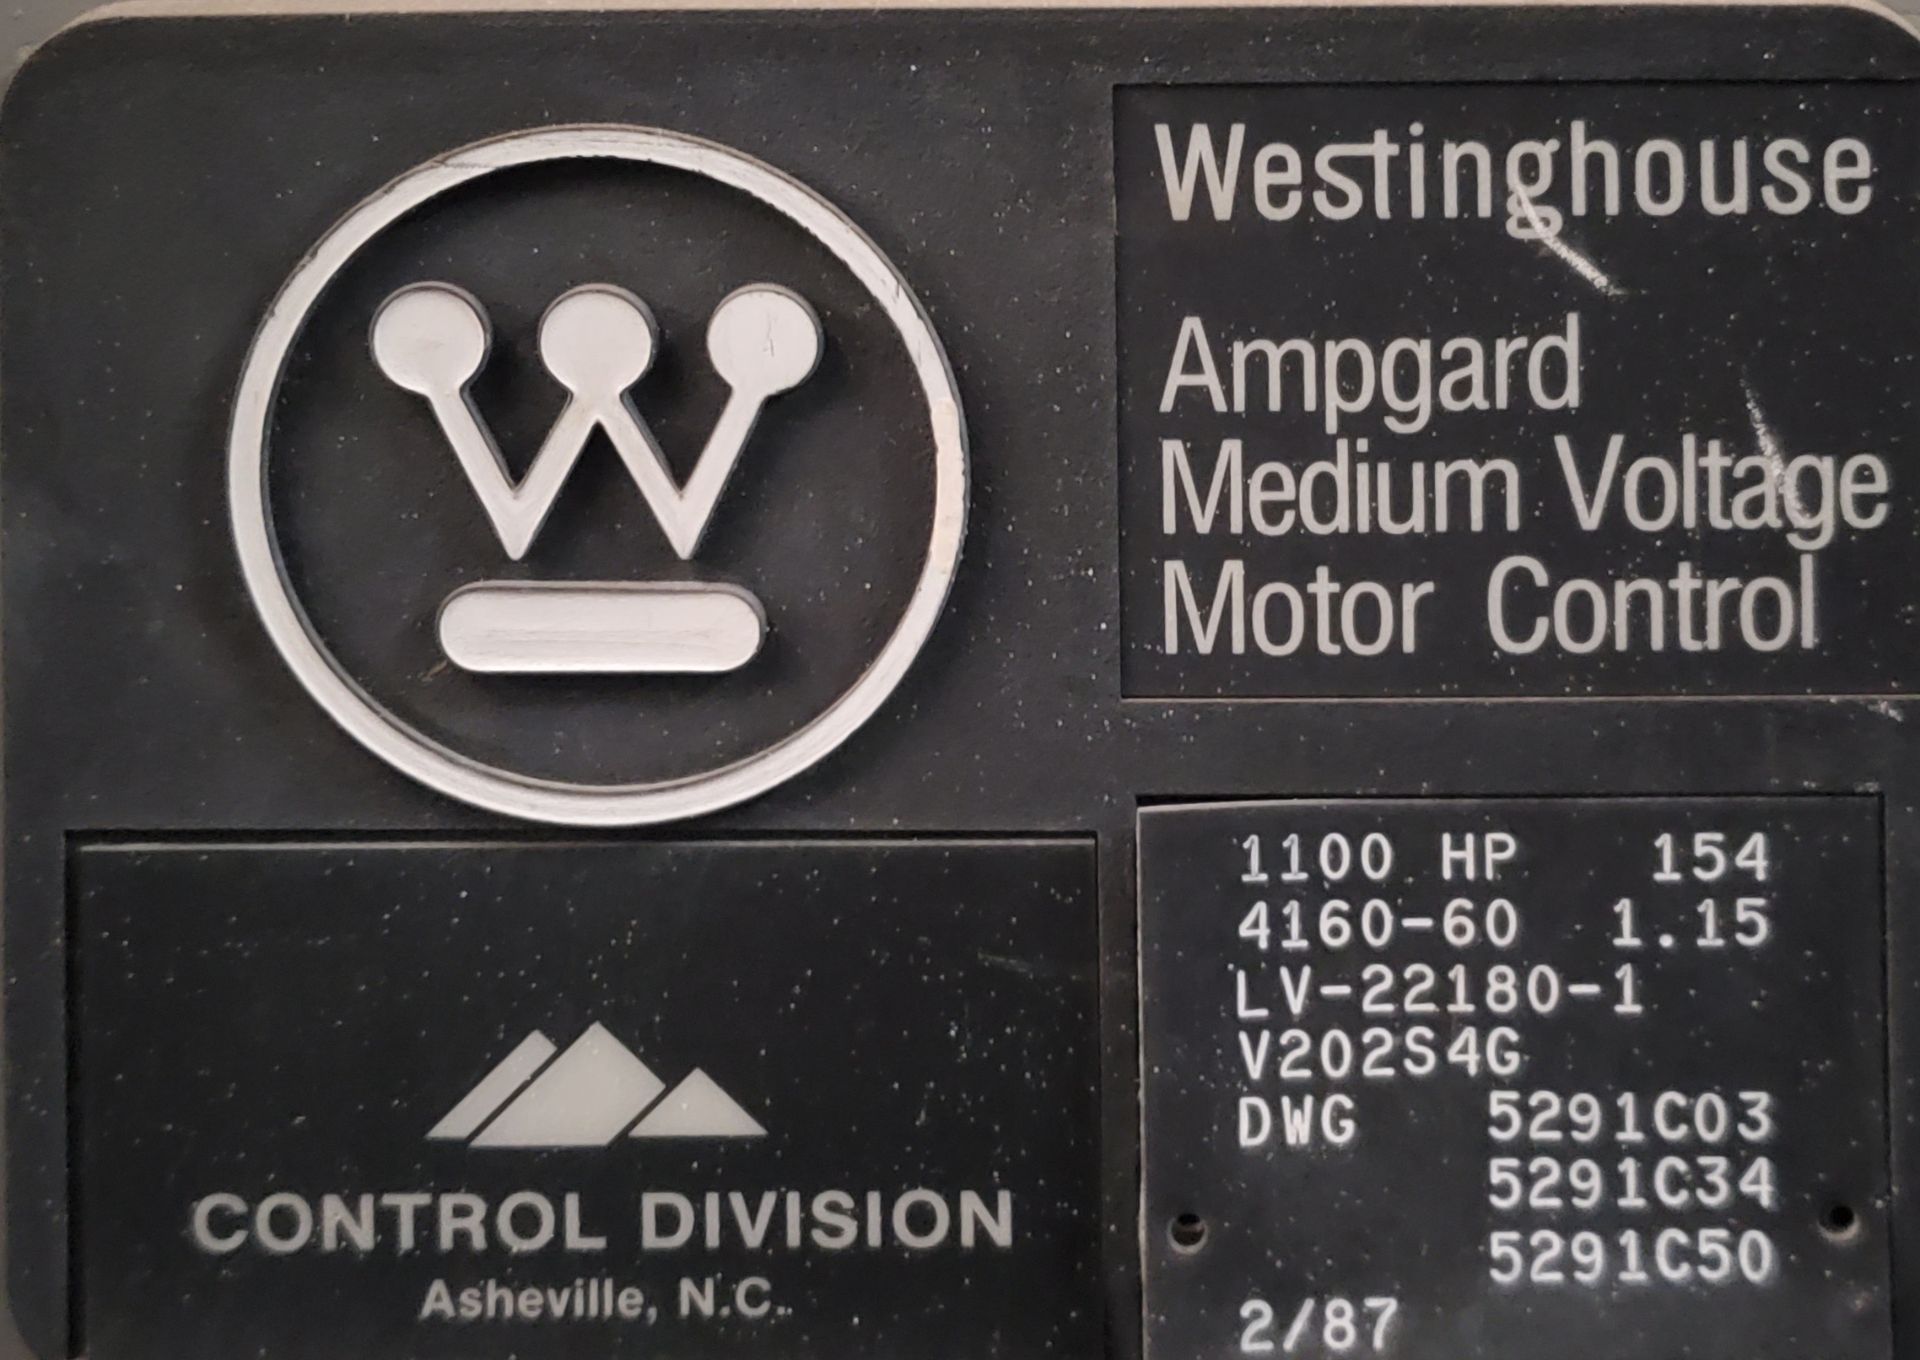 Westinghouse Type SJA 50V 1430 Contactor 360A (LOADING FEES: $75) - Image 2 of 3